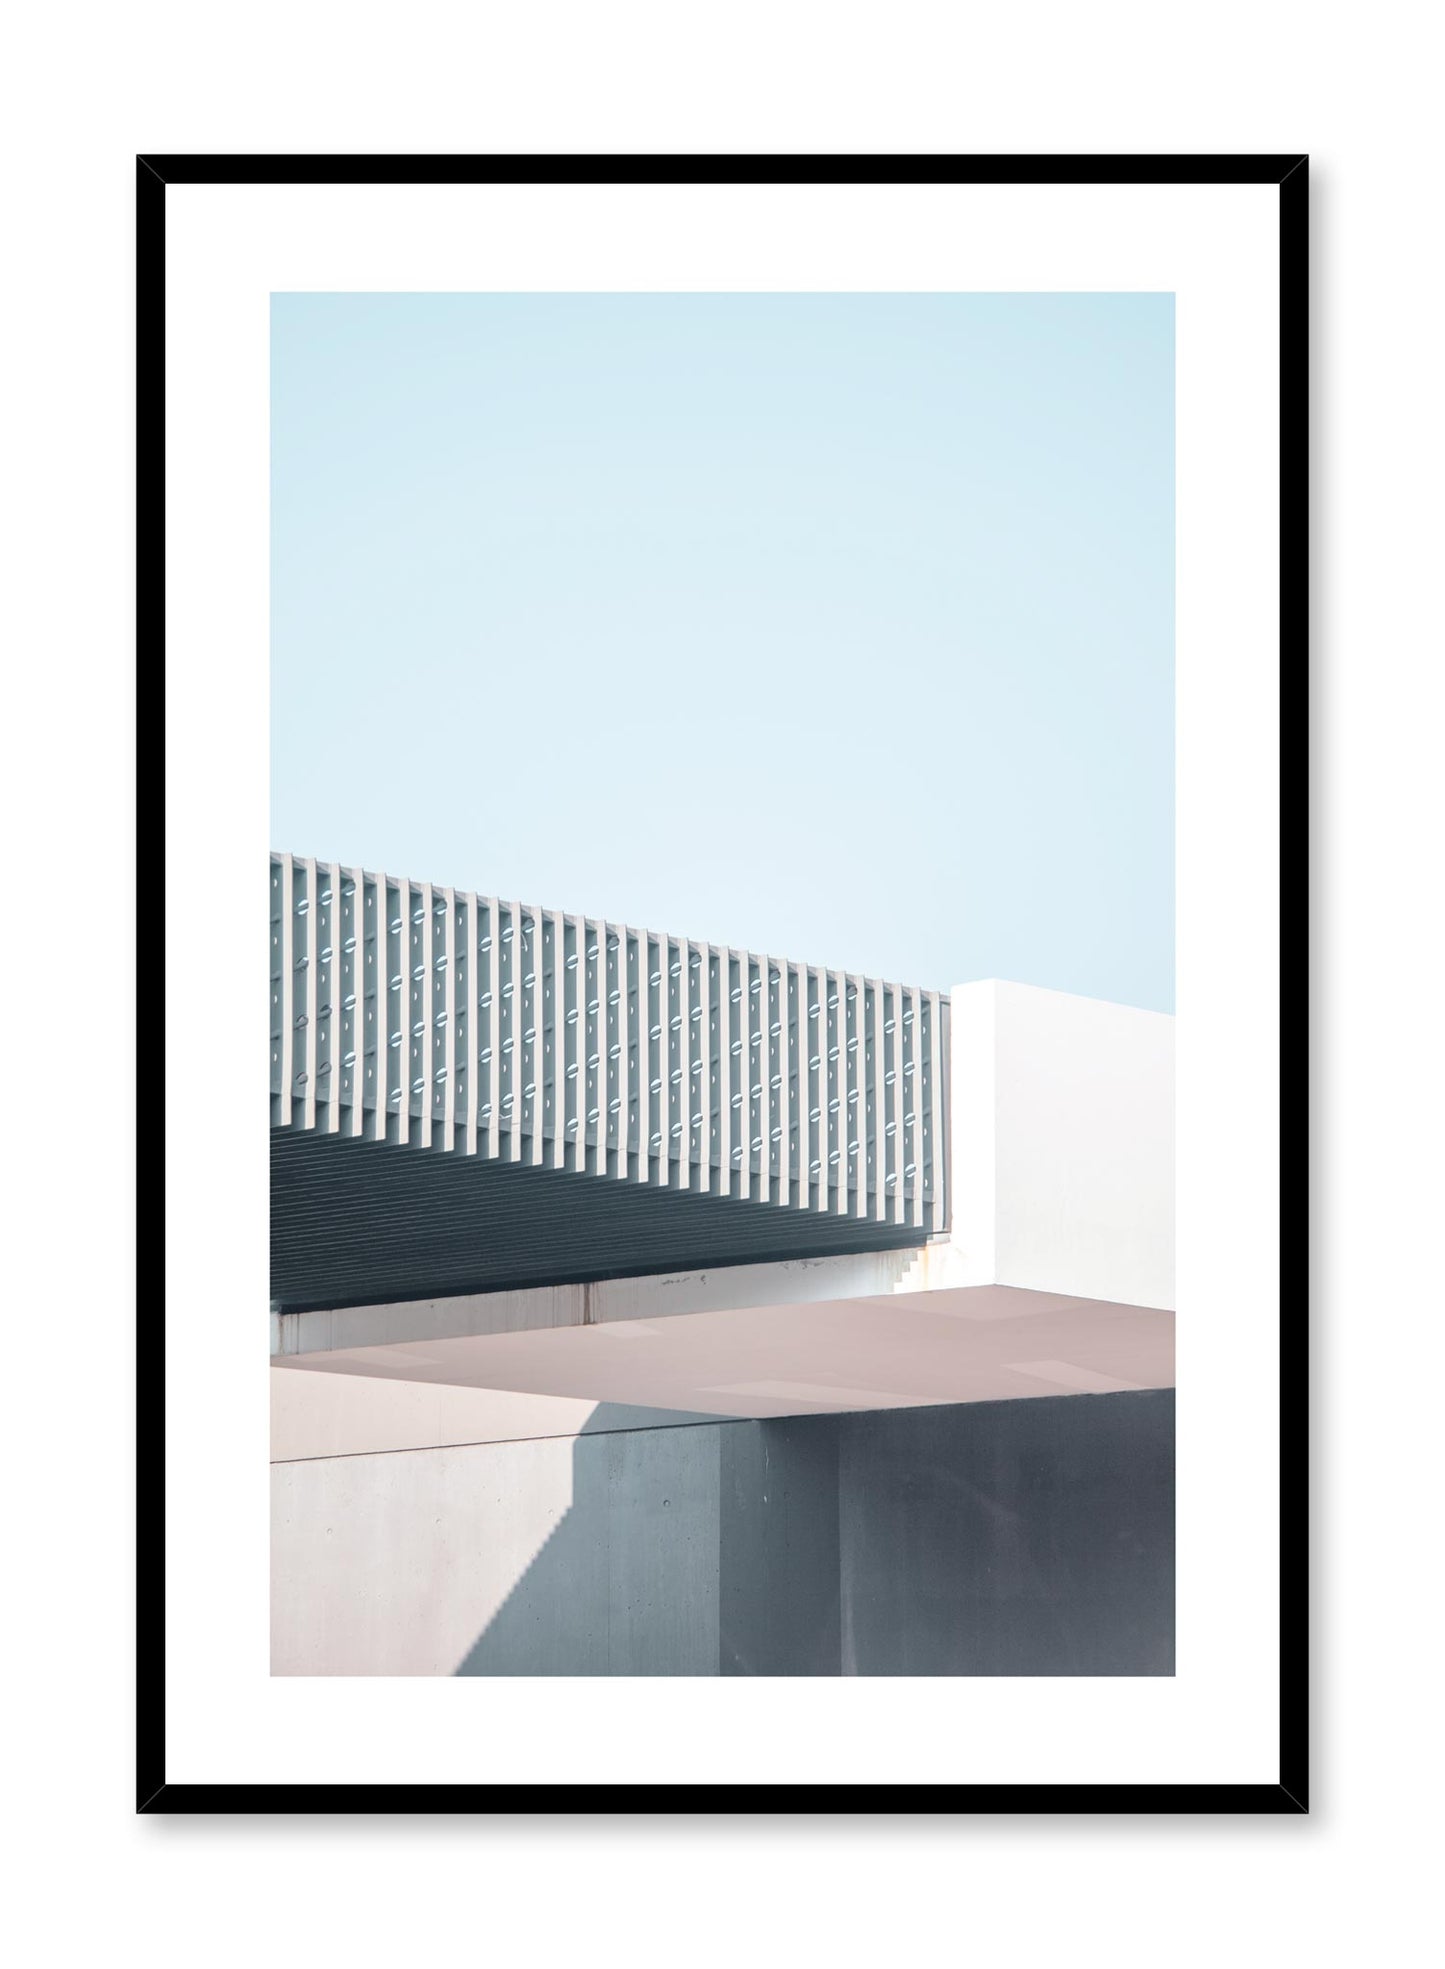 Minimalist design poster by Opposite Wall with urban photography of industrial overpass